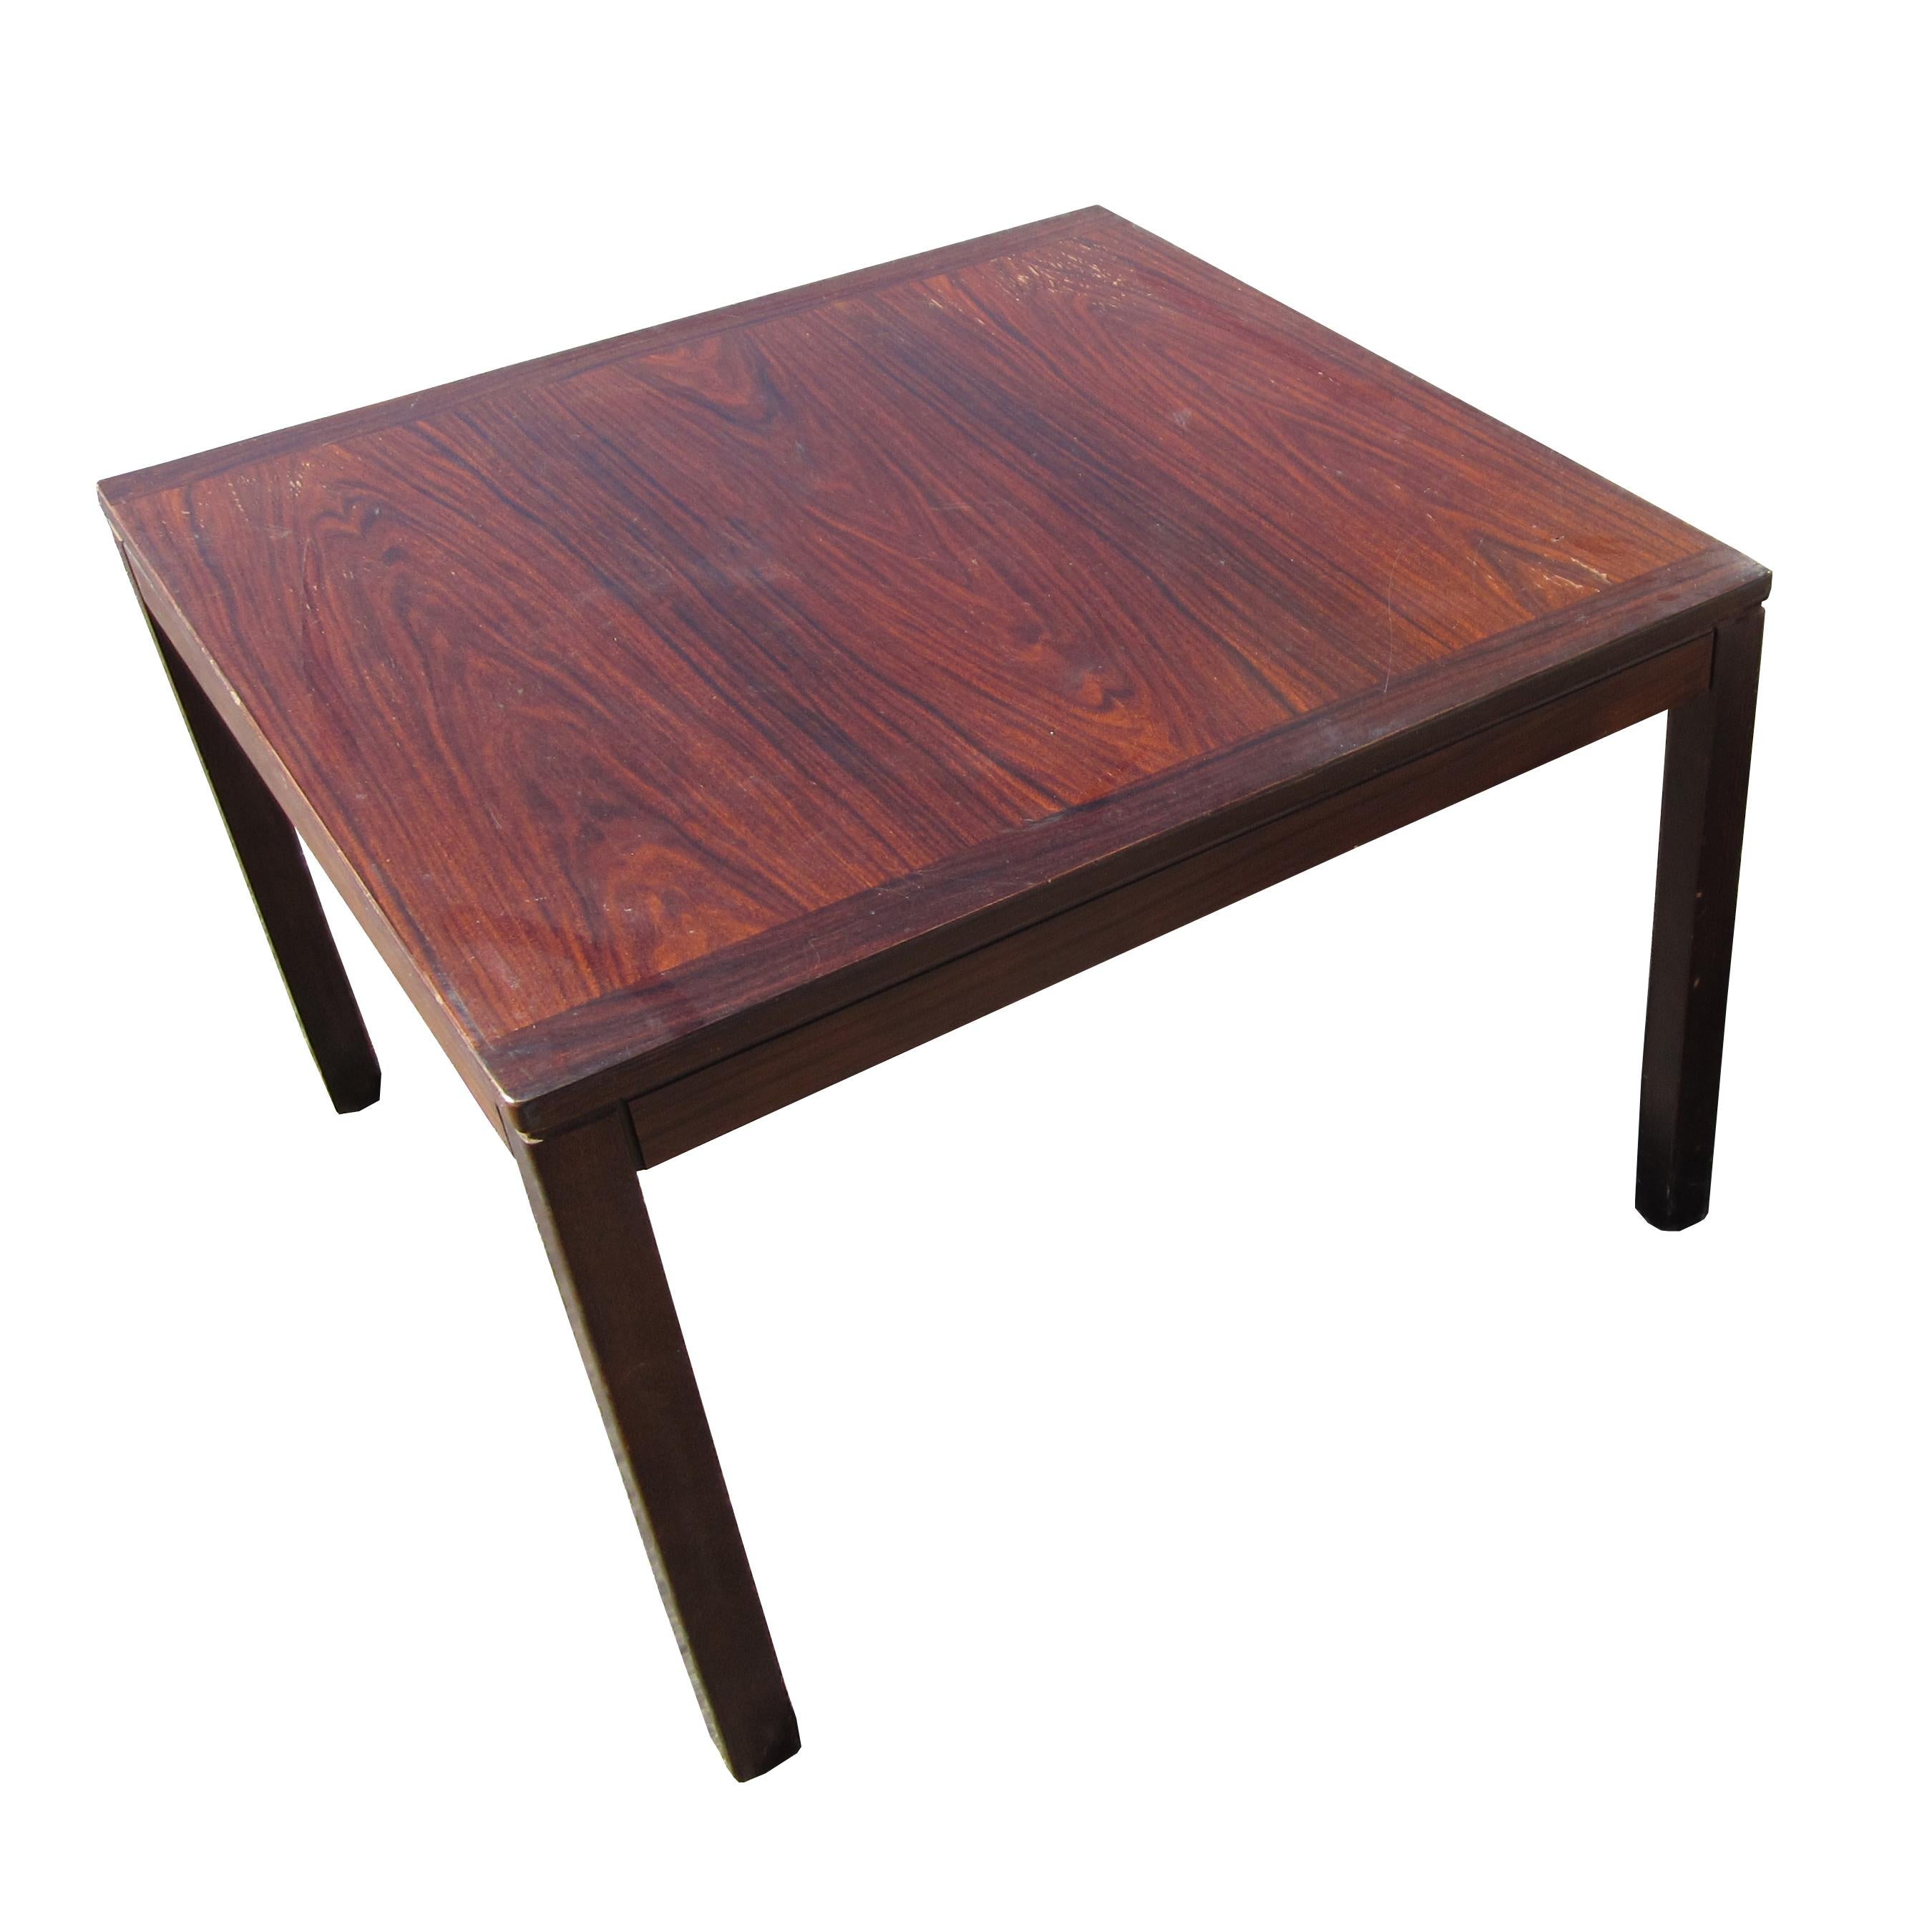 Two vintage, rosewood side tables. One table is square and the other is rectangular. Sturdy and reliable, with quality design and craftsmanship. Beautiful, dark finish; distinctive slotted vertices between legs and table top.
Dimensions of smaller